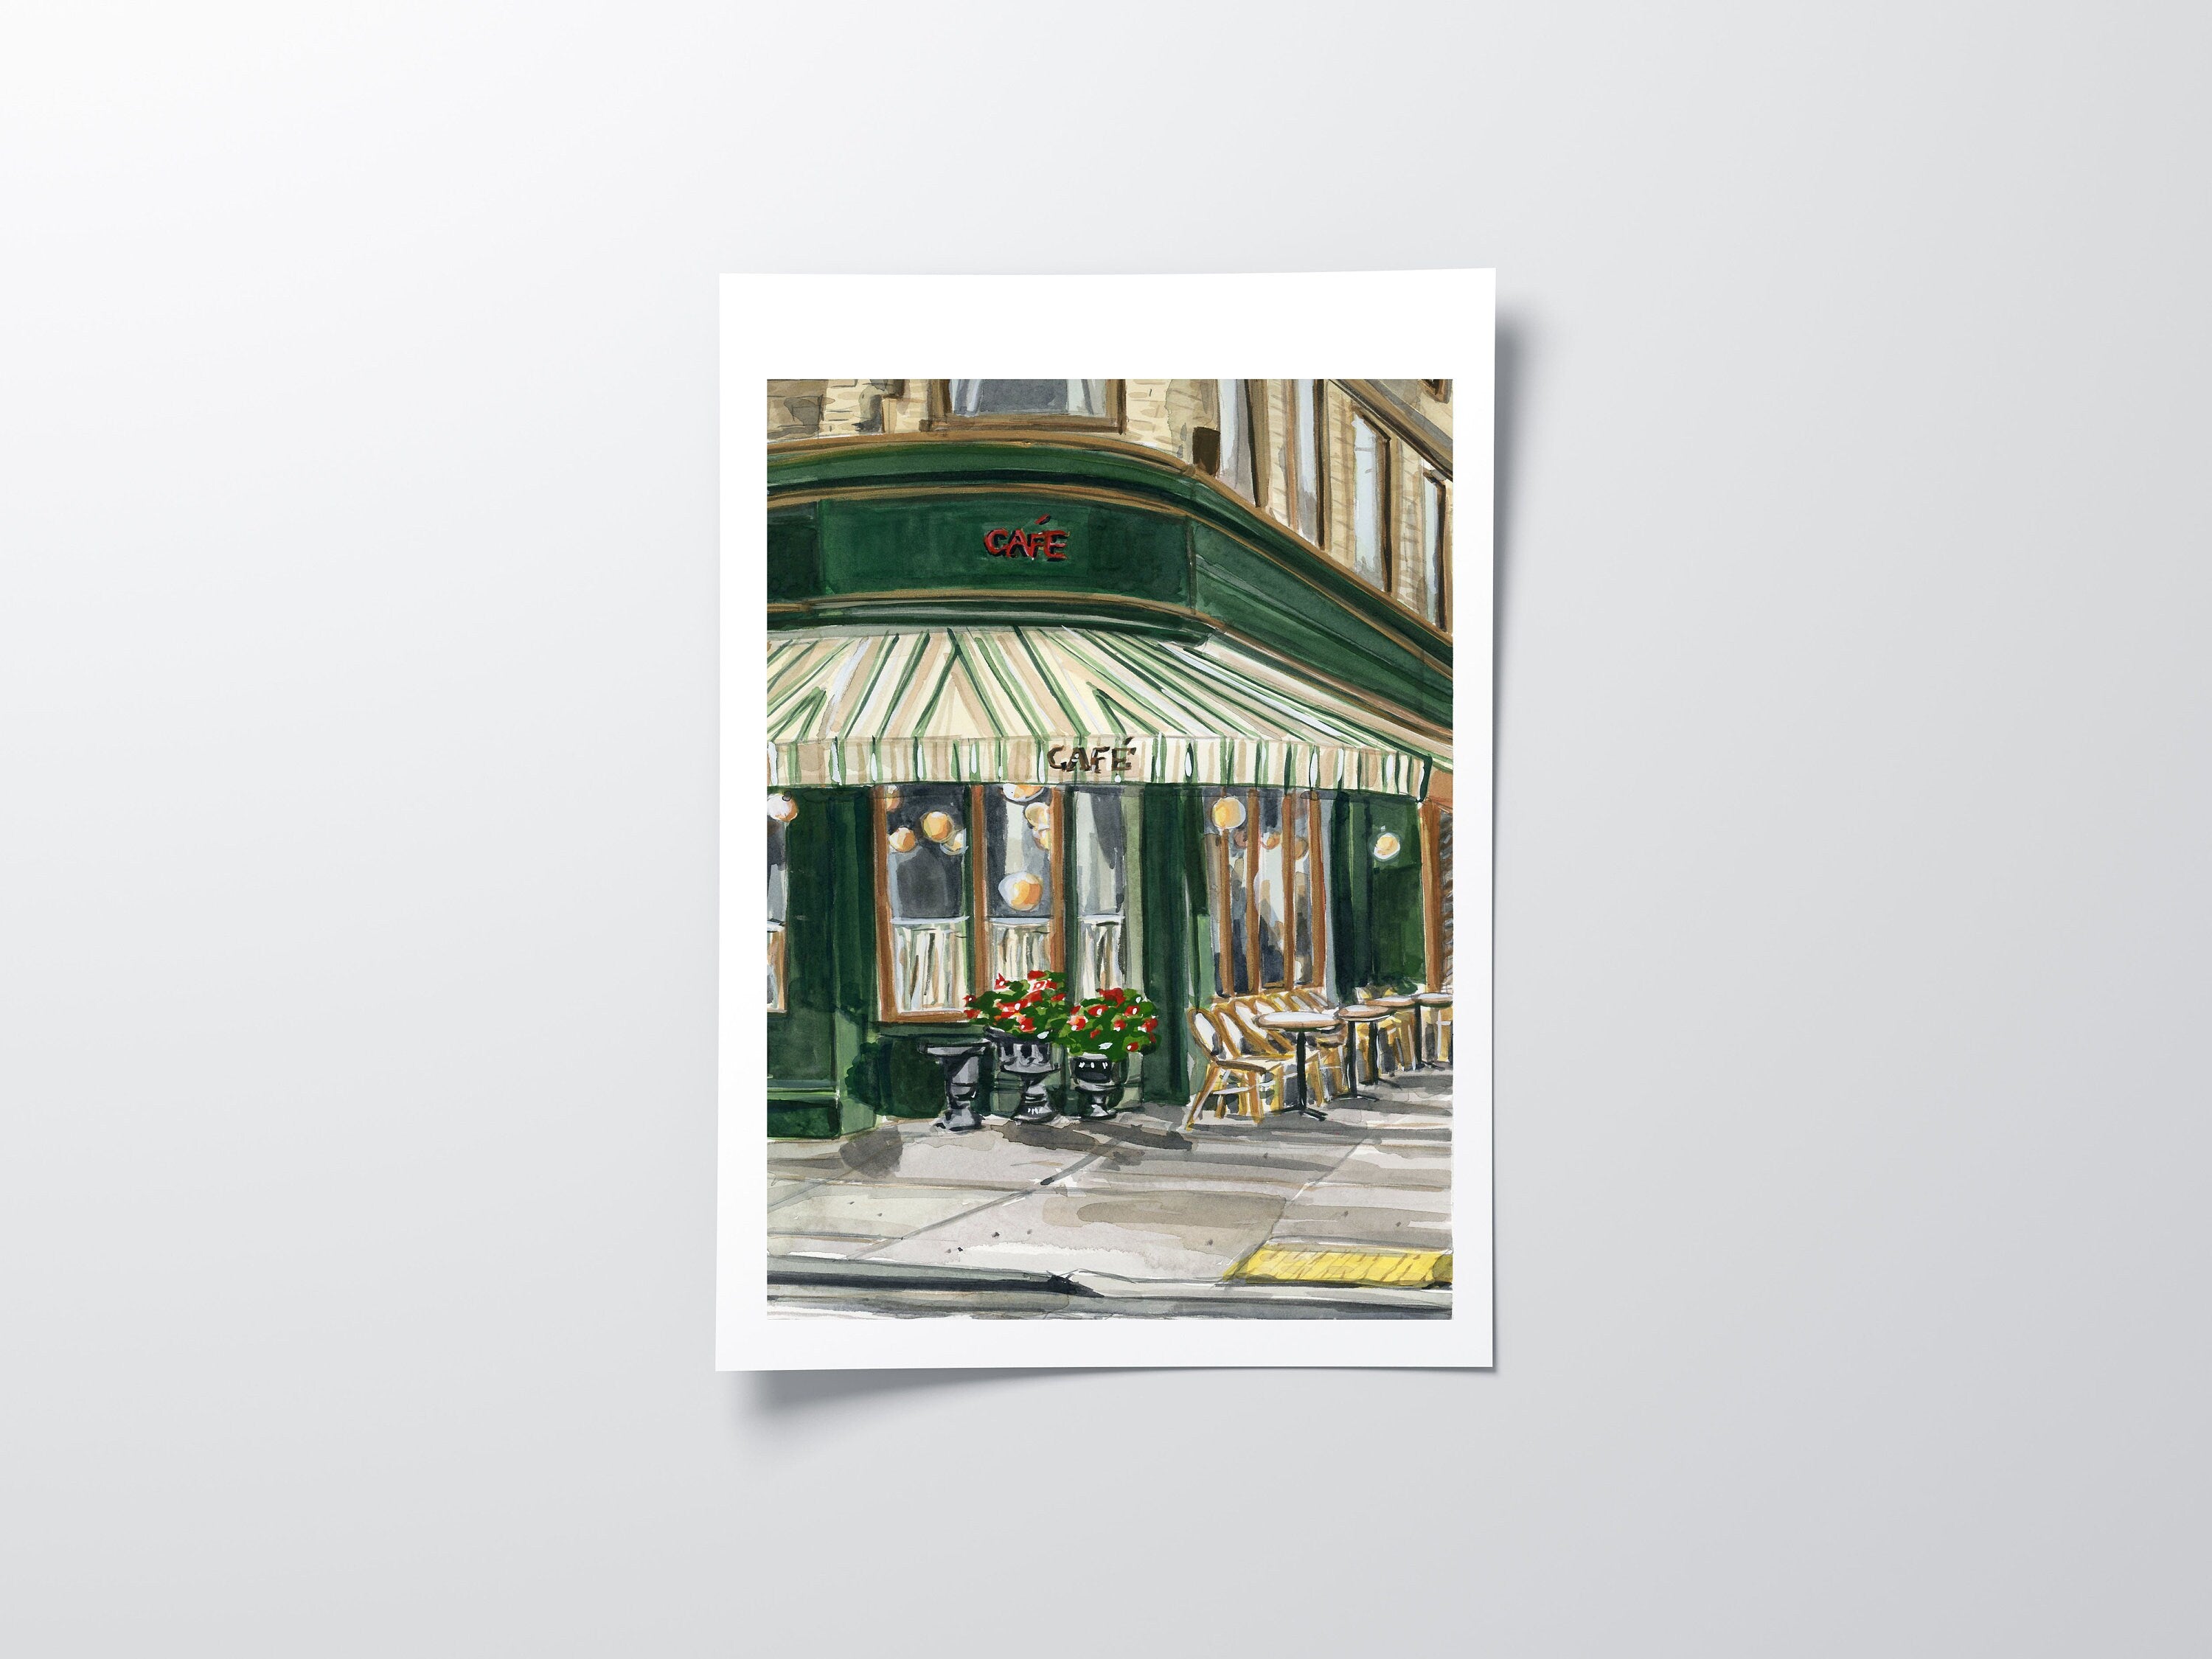 French cafe print of painting by Medjool Studio. Print of original gouache painting of the front of a small cafe on the corner of a street in France. Inspired by travels to Europe and fond memories of sightseeing and stopping for a coffee and croissant to refresh and enjoy the French atmosphere.